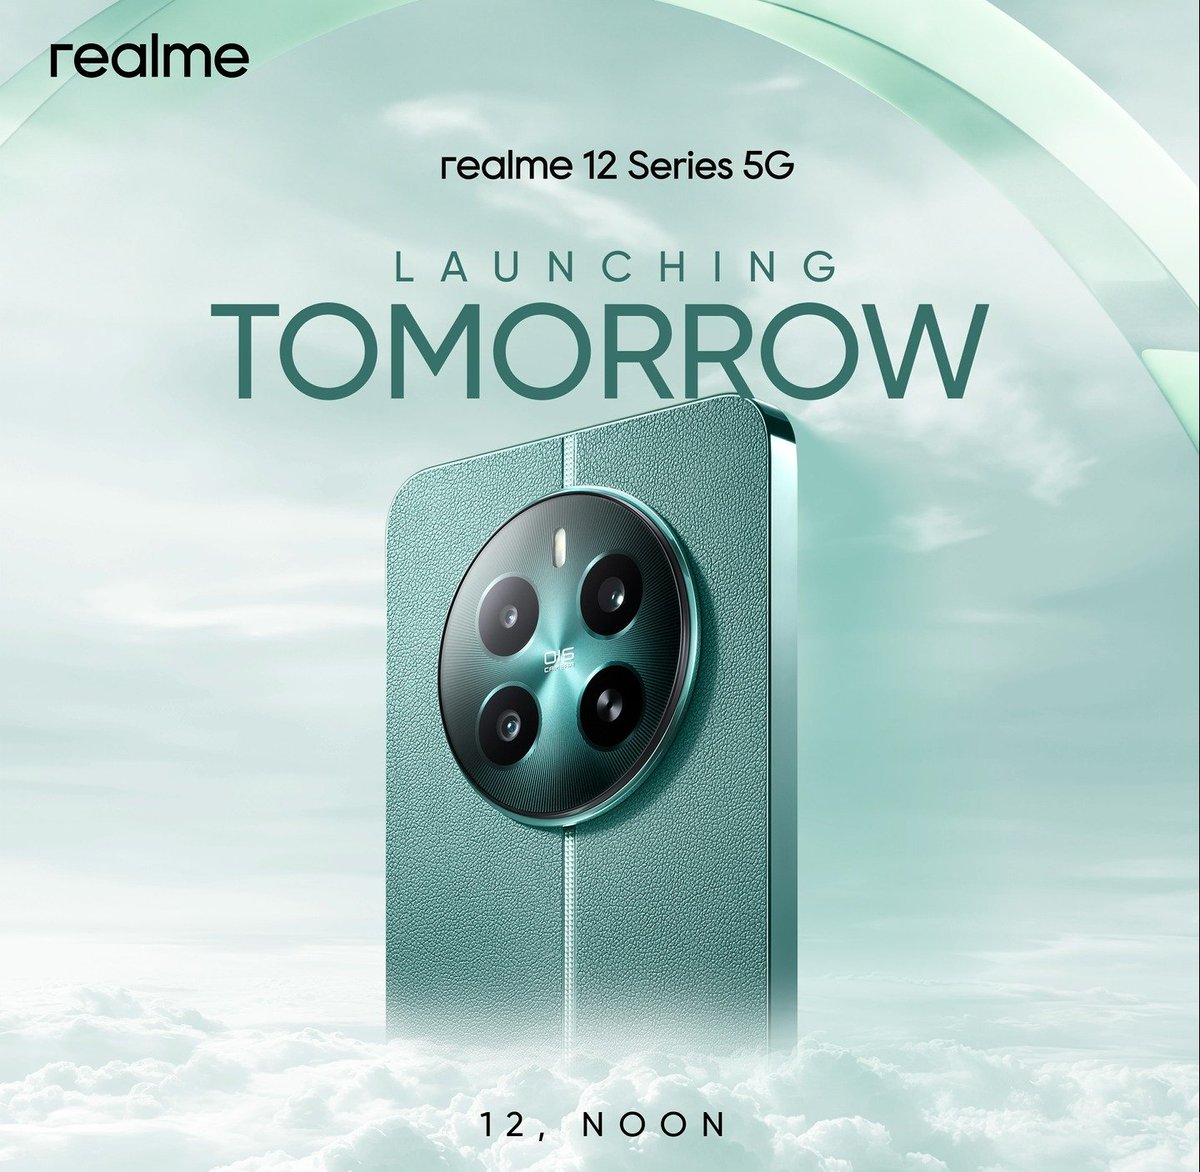 Alright. realme 12 5G series launching tomorrow. 200 likes - 1x realme 12 5G giveaway 400 likes - 2x realme 12 5G giveaway 600 likes - I'll add the Realme 12+ 5G as well 😎 #realme12Series5G #realmePortraitMaster